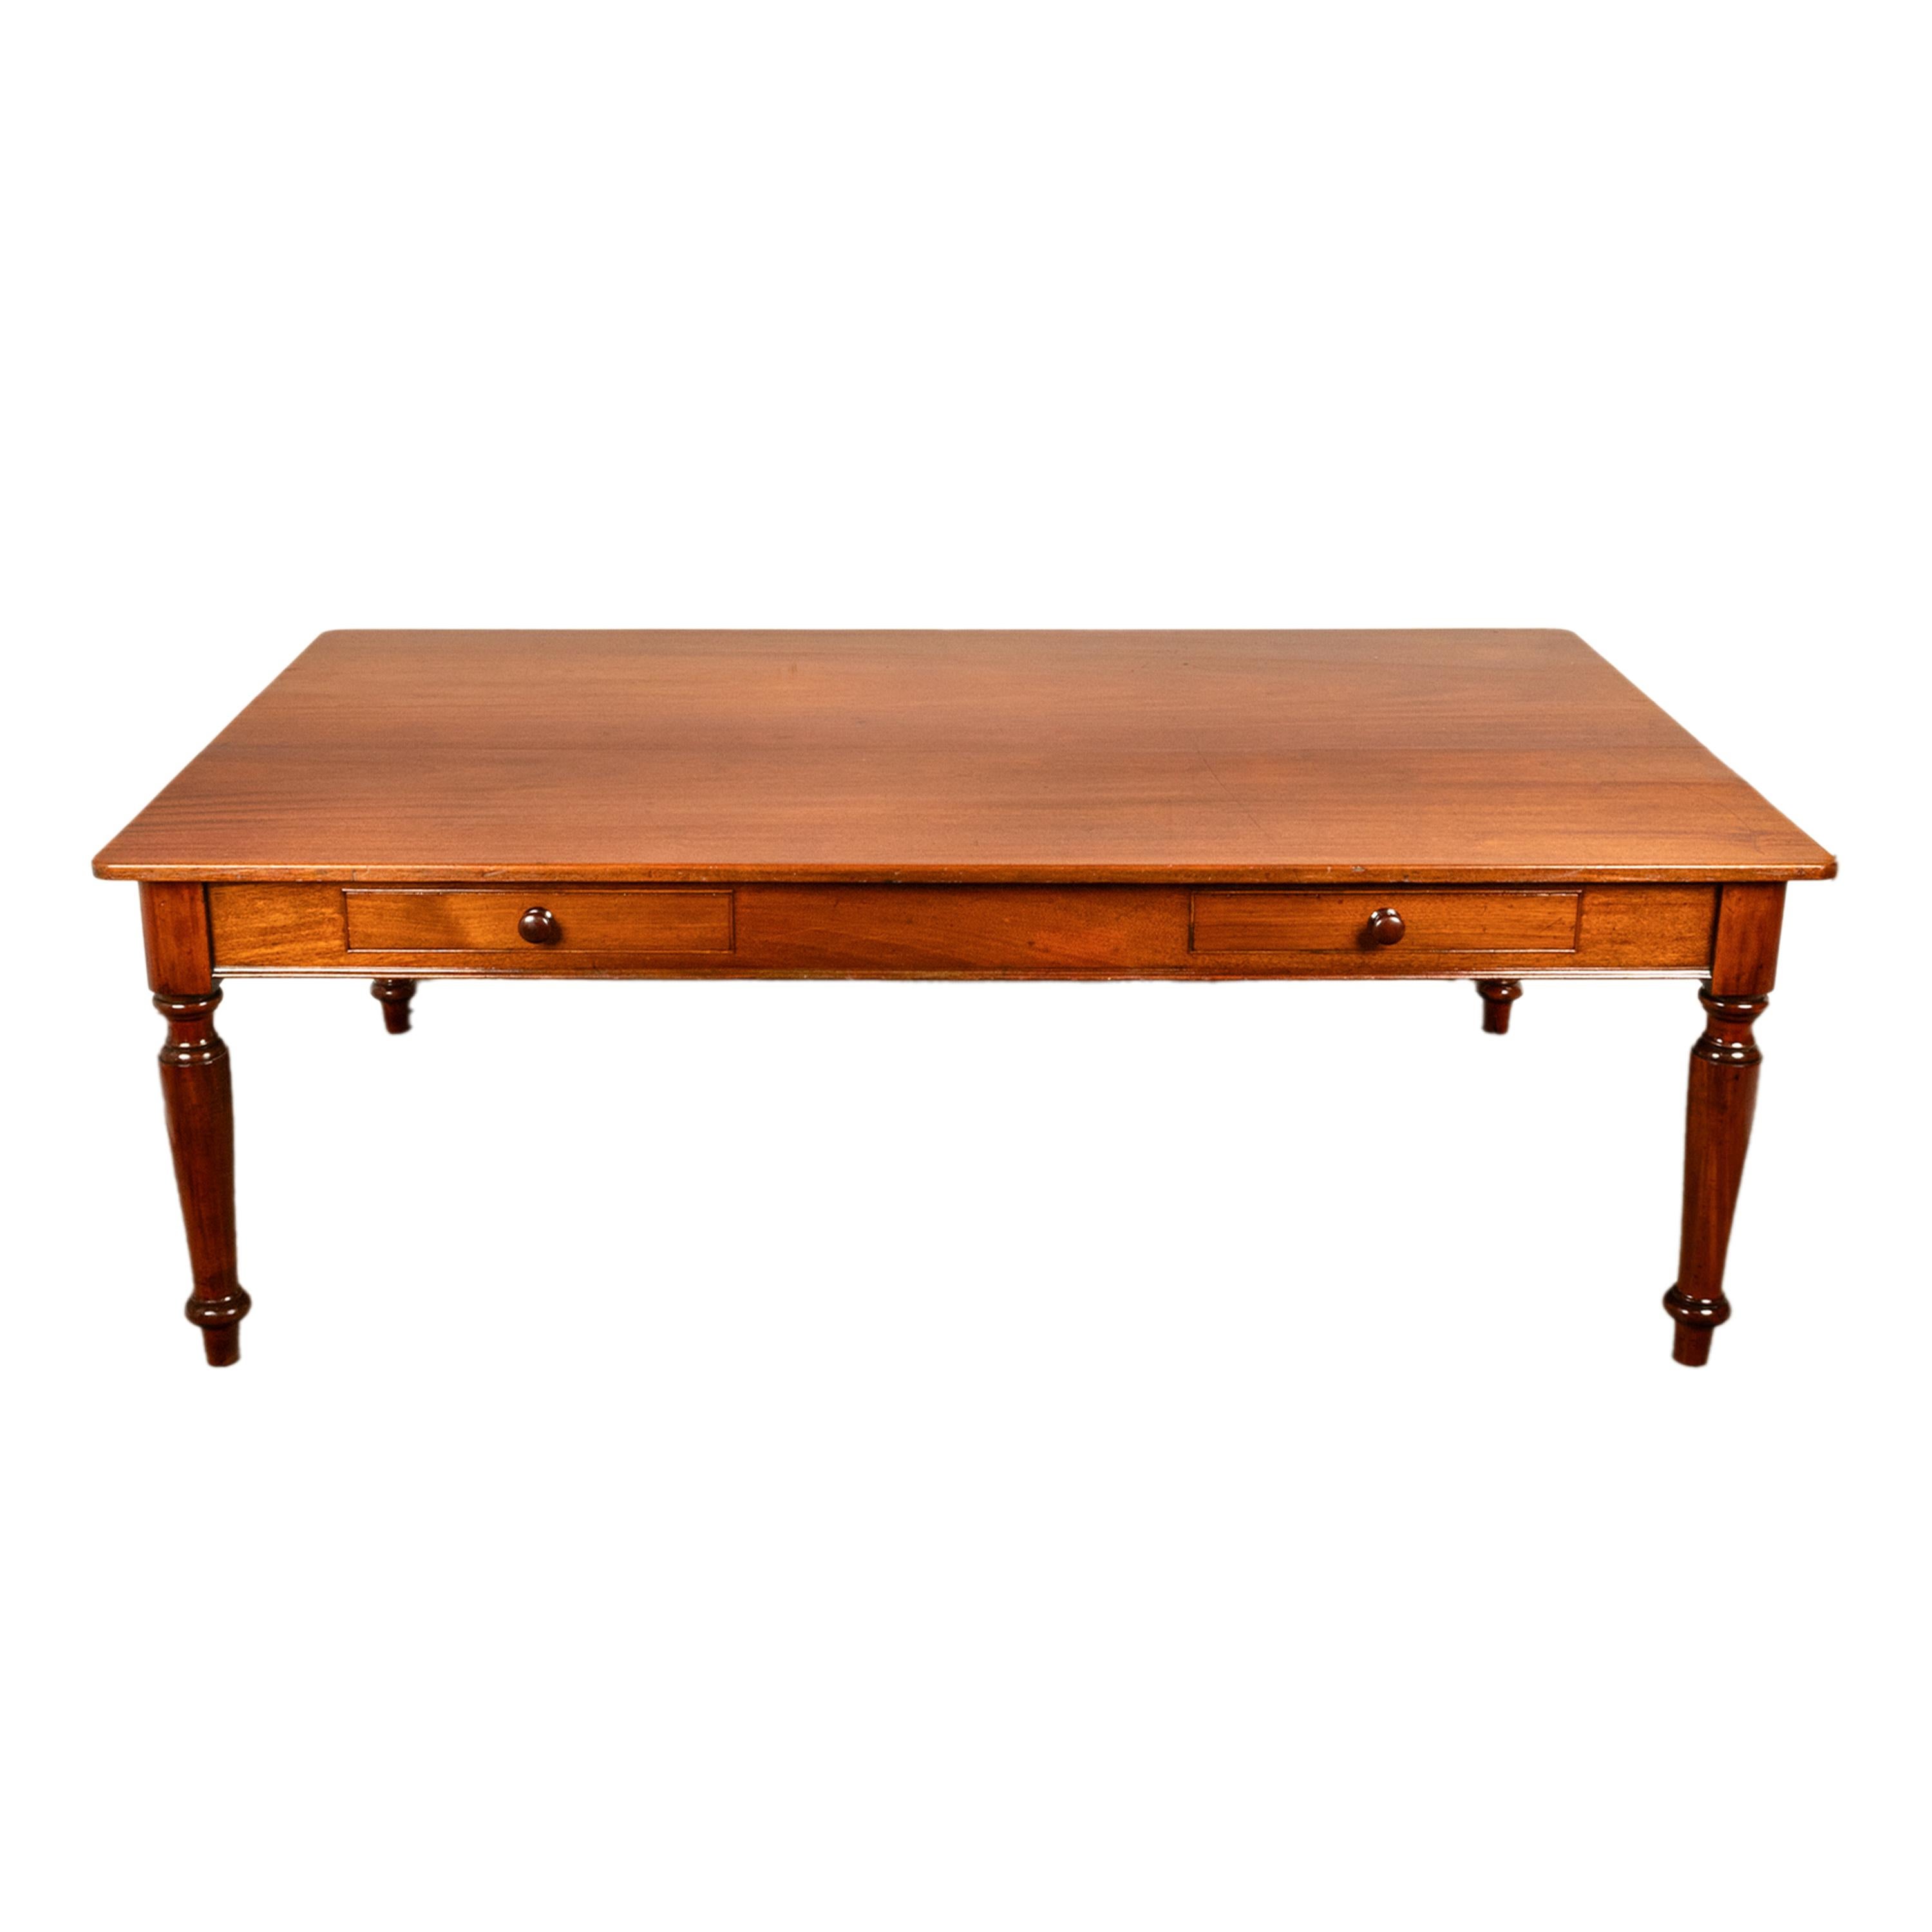 A large & fine quality solid flame mahogany library, conference or dinning table, circa 1860.
The table is made from the finest solid flame mahogany, the substantial top over two long drawers to the front, each fitted with a bun shaped handle. The